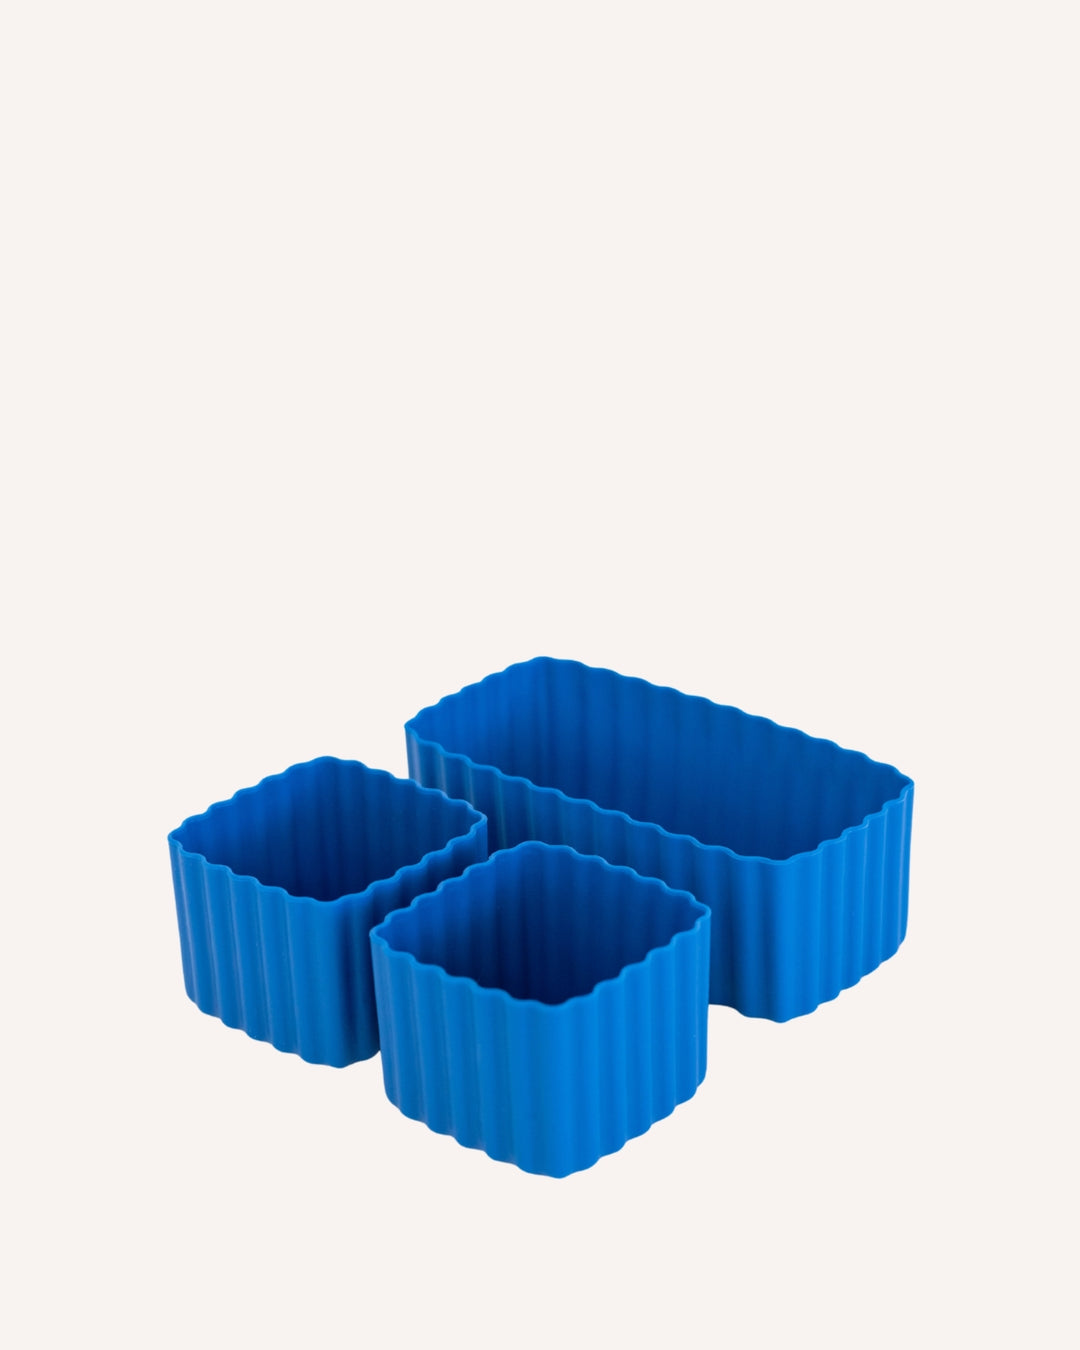 Rectangular Silicone Lunch Box Dividers 3pcs - Bento Box Divider 4x2x1.5  - Bento Box Accessories Cupcake Baking Cups - Blue Turquoise Yellow